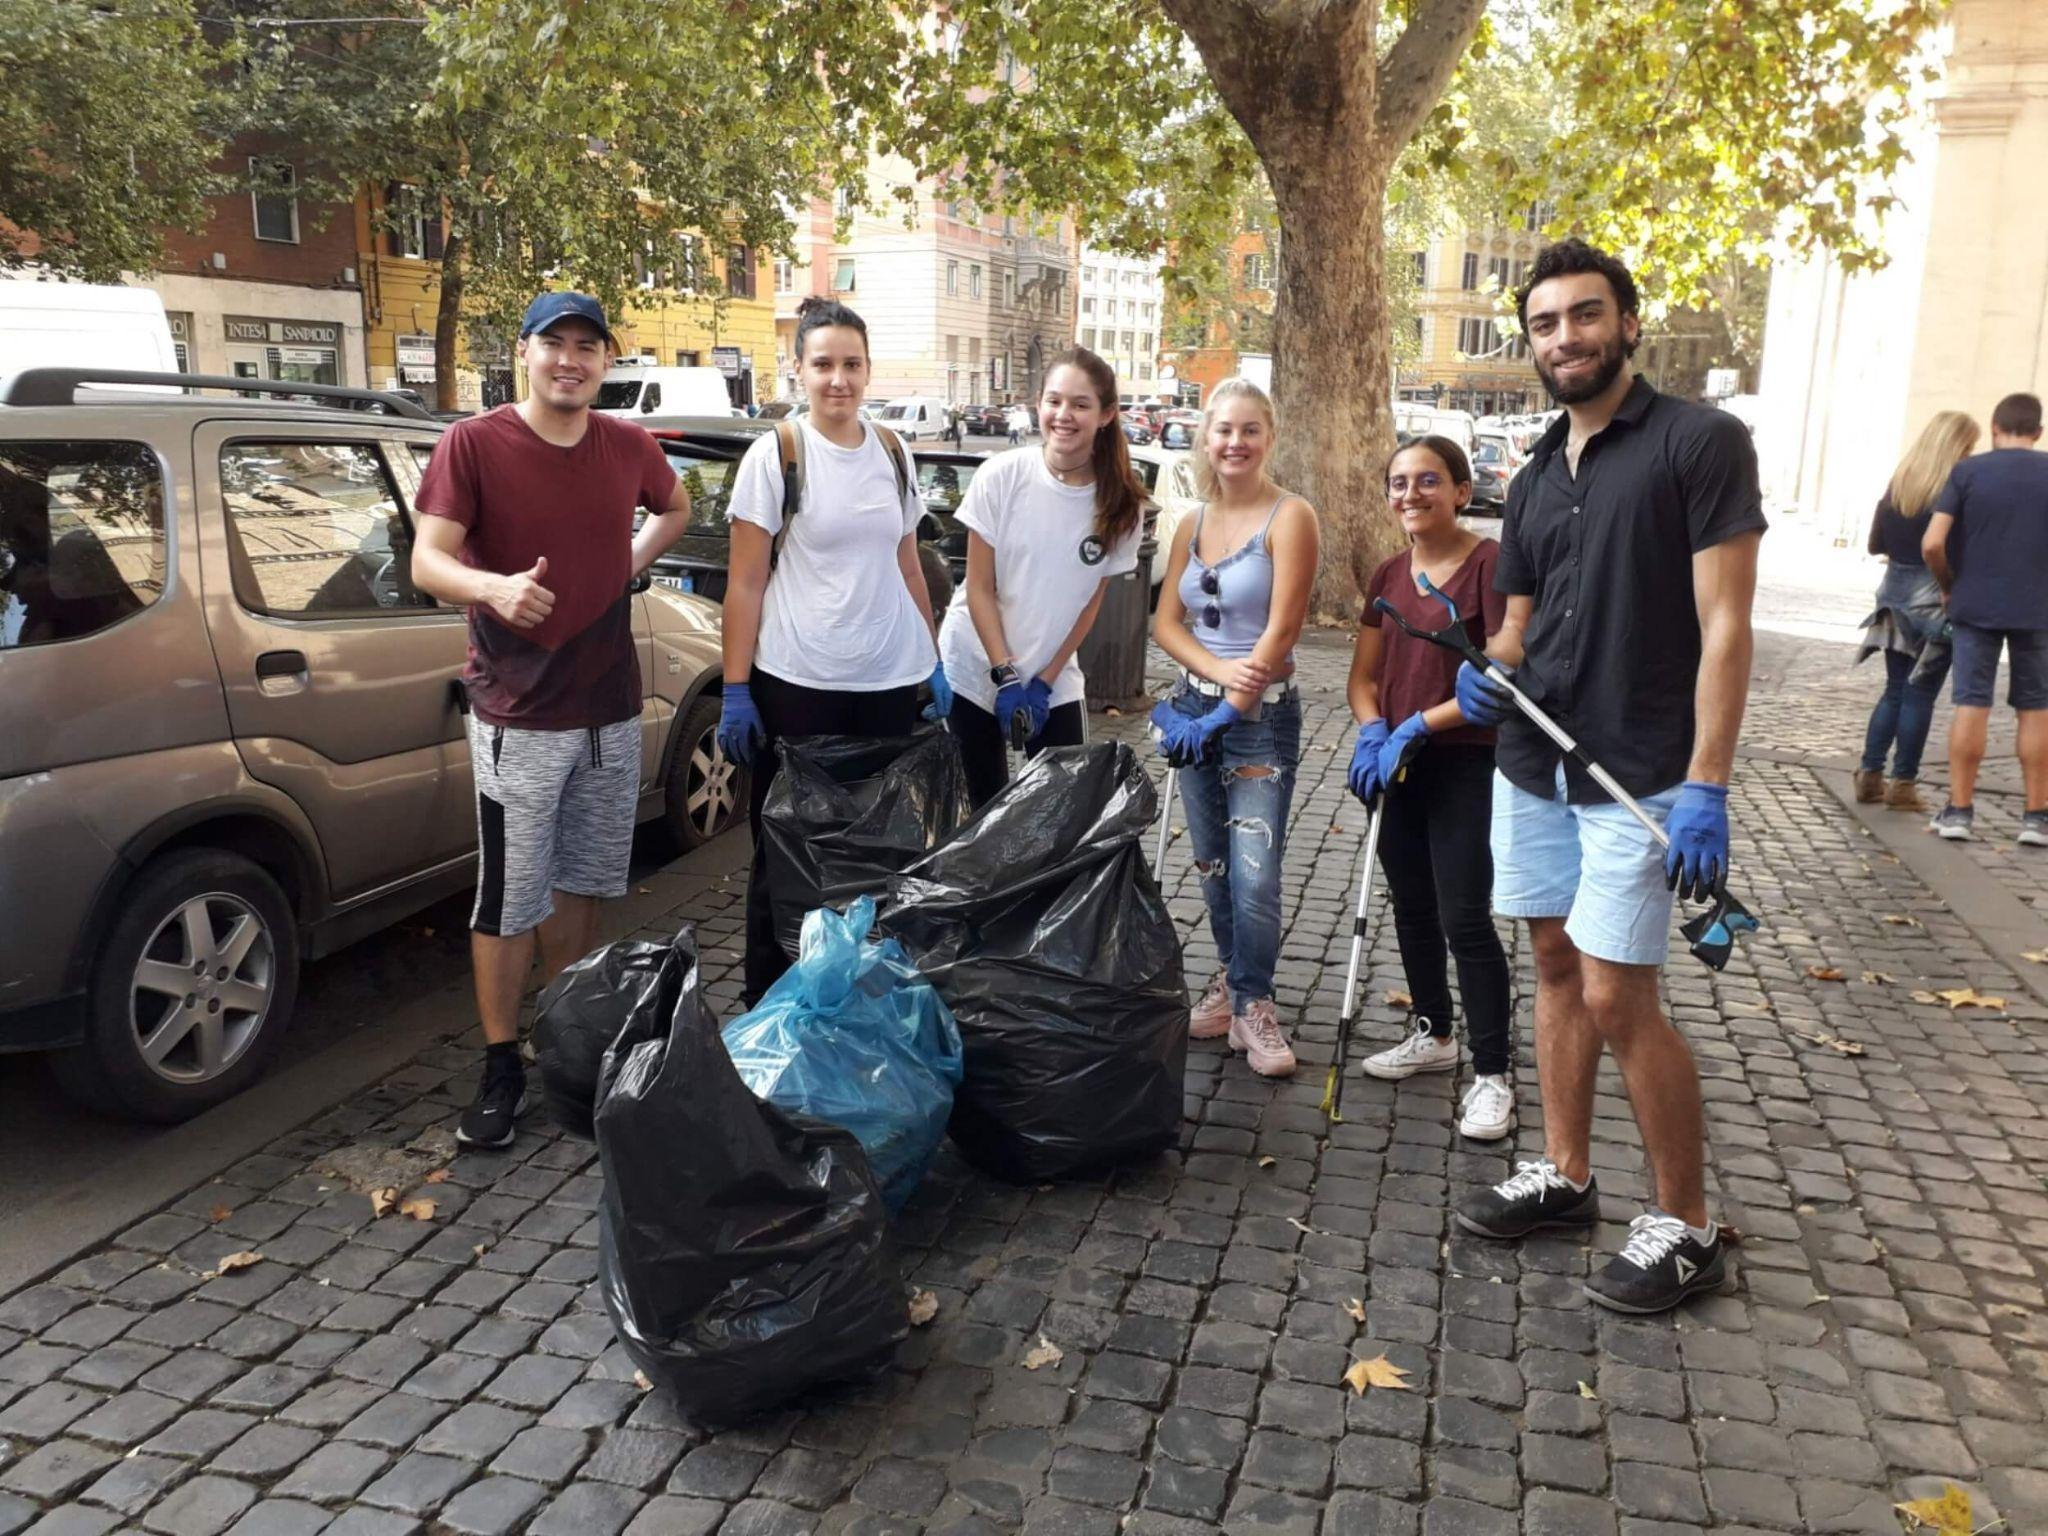 A group of JCU students participating in a garbage pickup on the street.